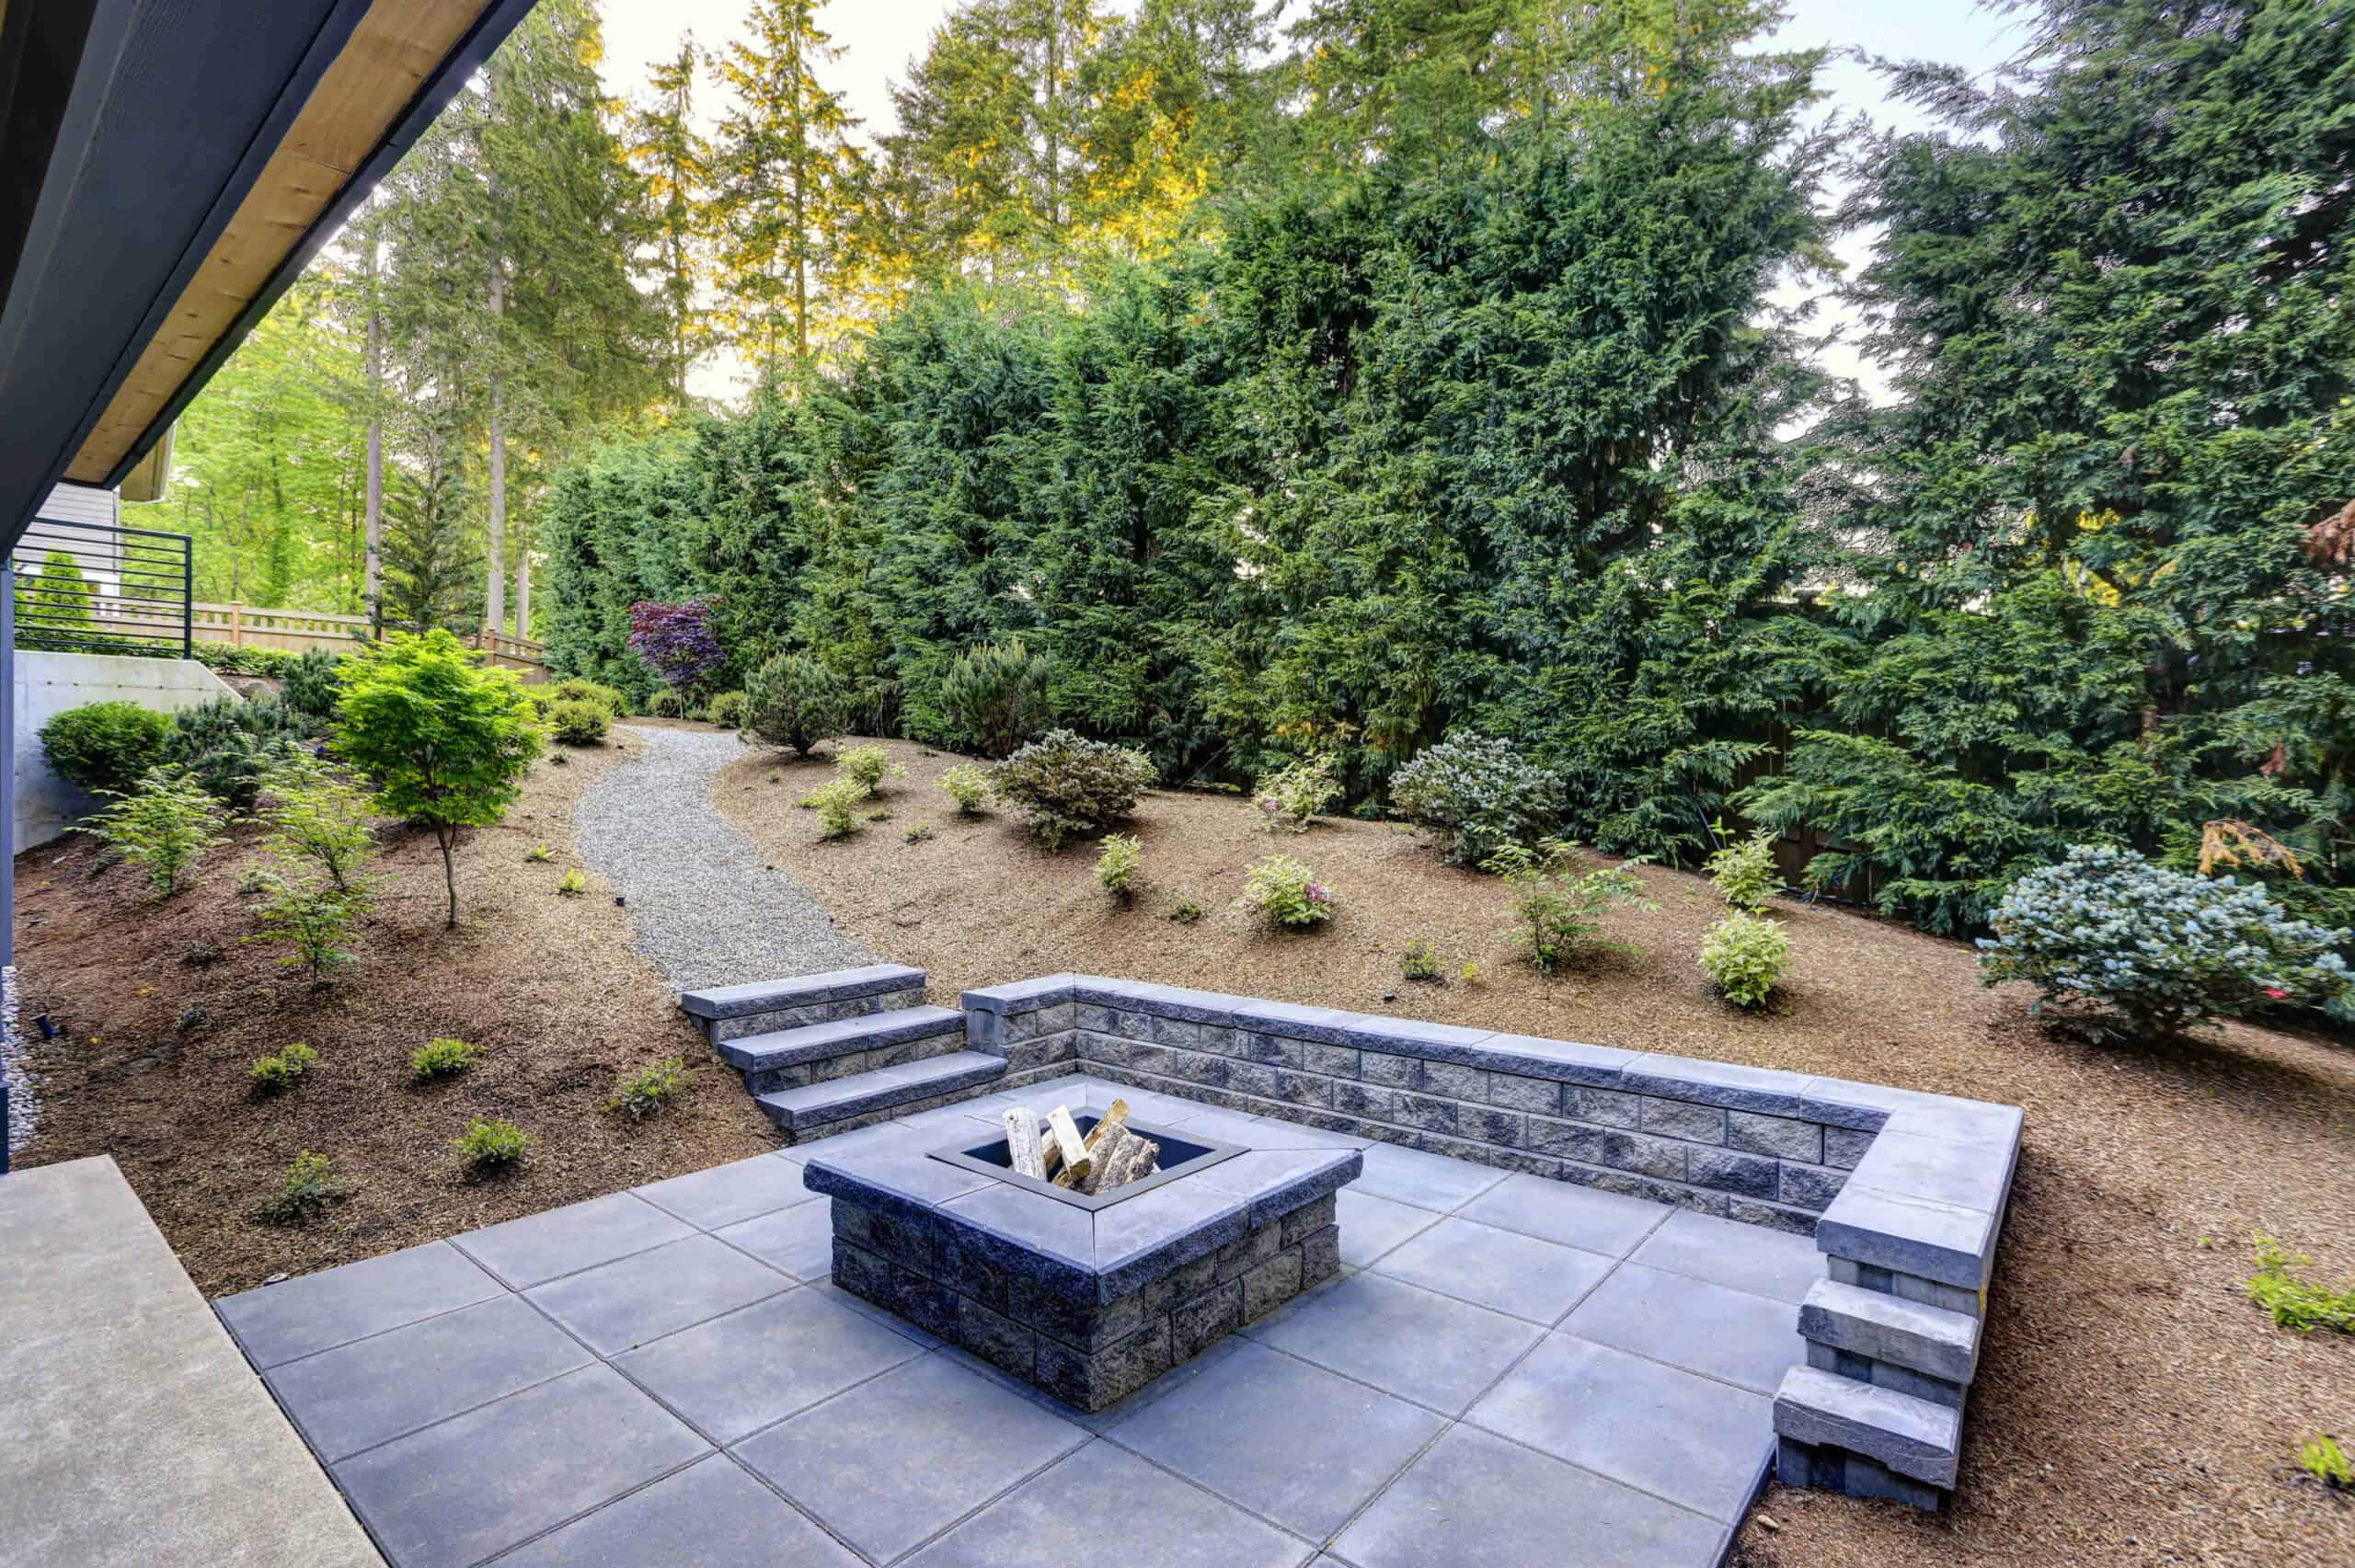 Incorporate user-friendly hardscaping features for the ultimate outdoor living experience